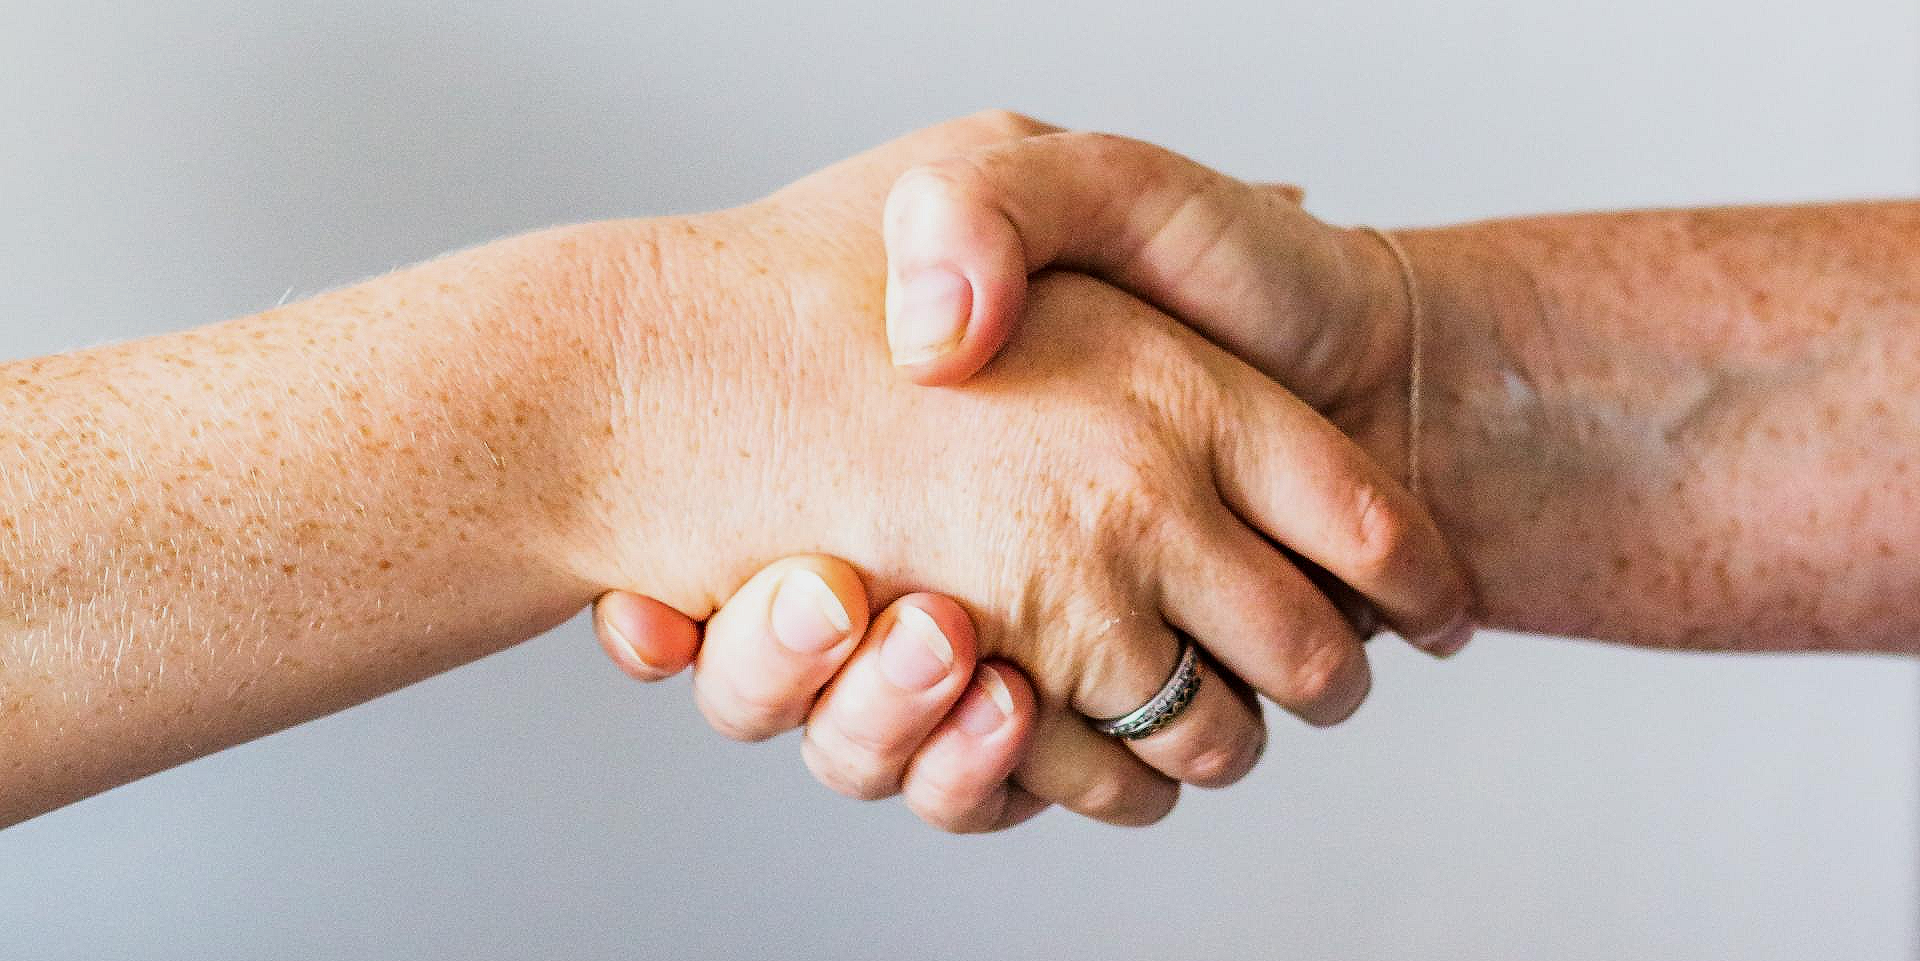 Image of two hands shaking-hands